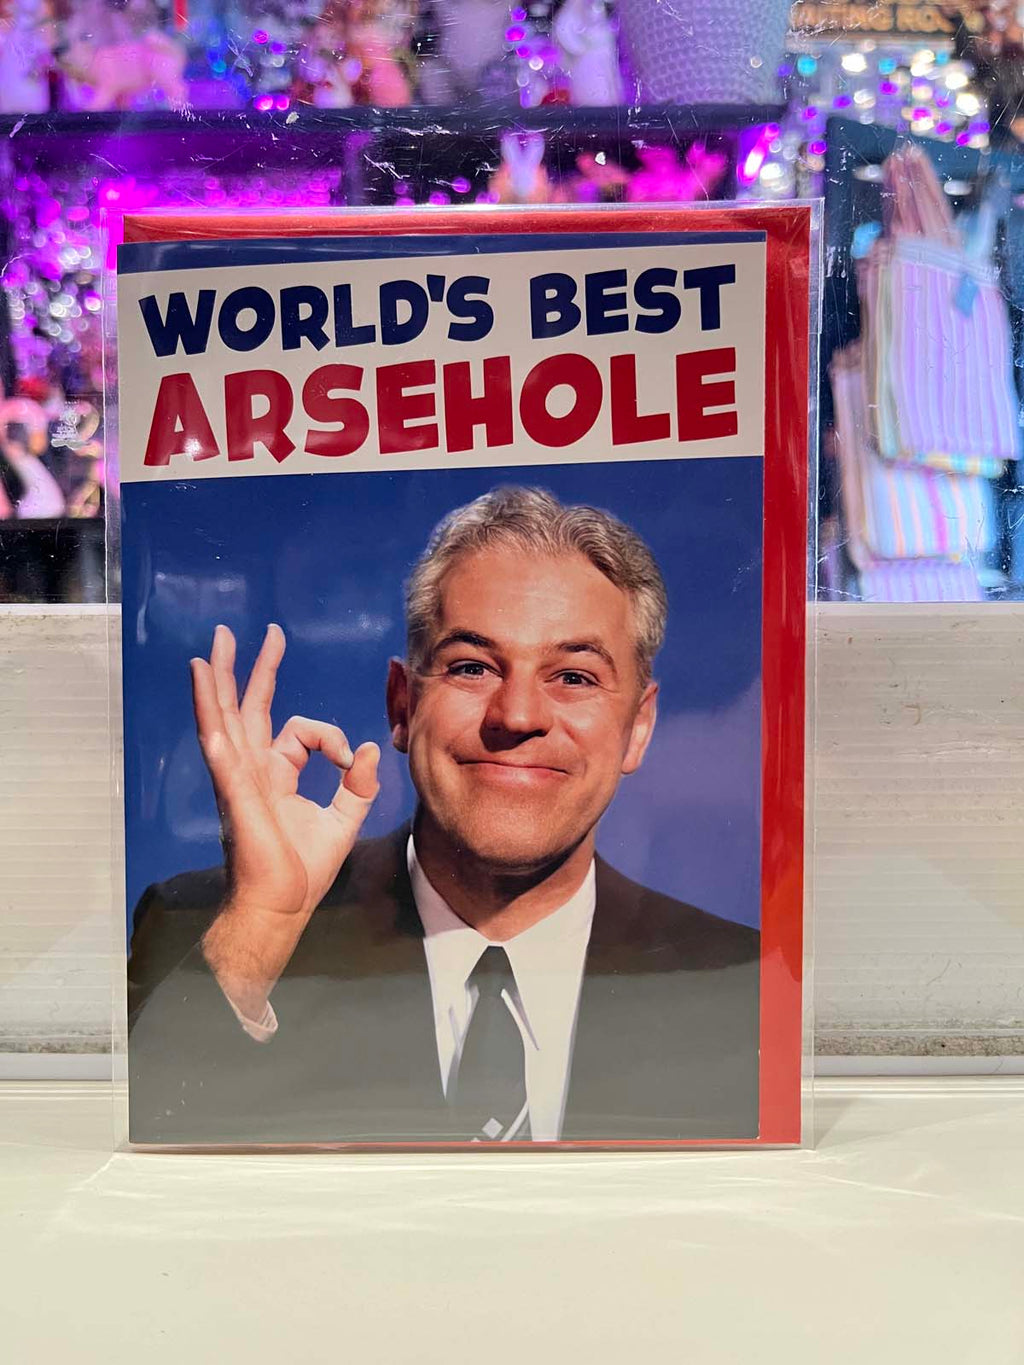 Greeting Card - World’s Best Arsehole